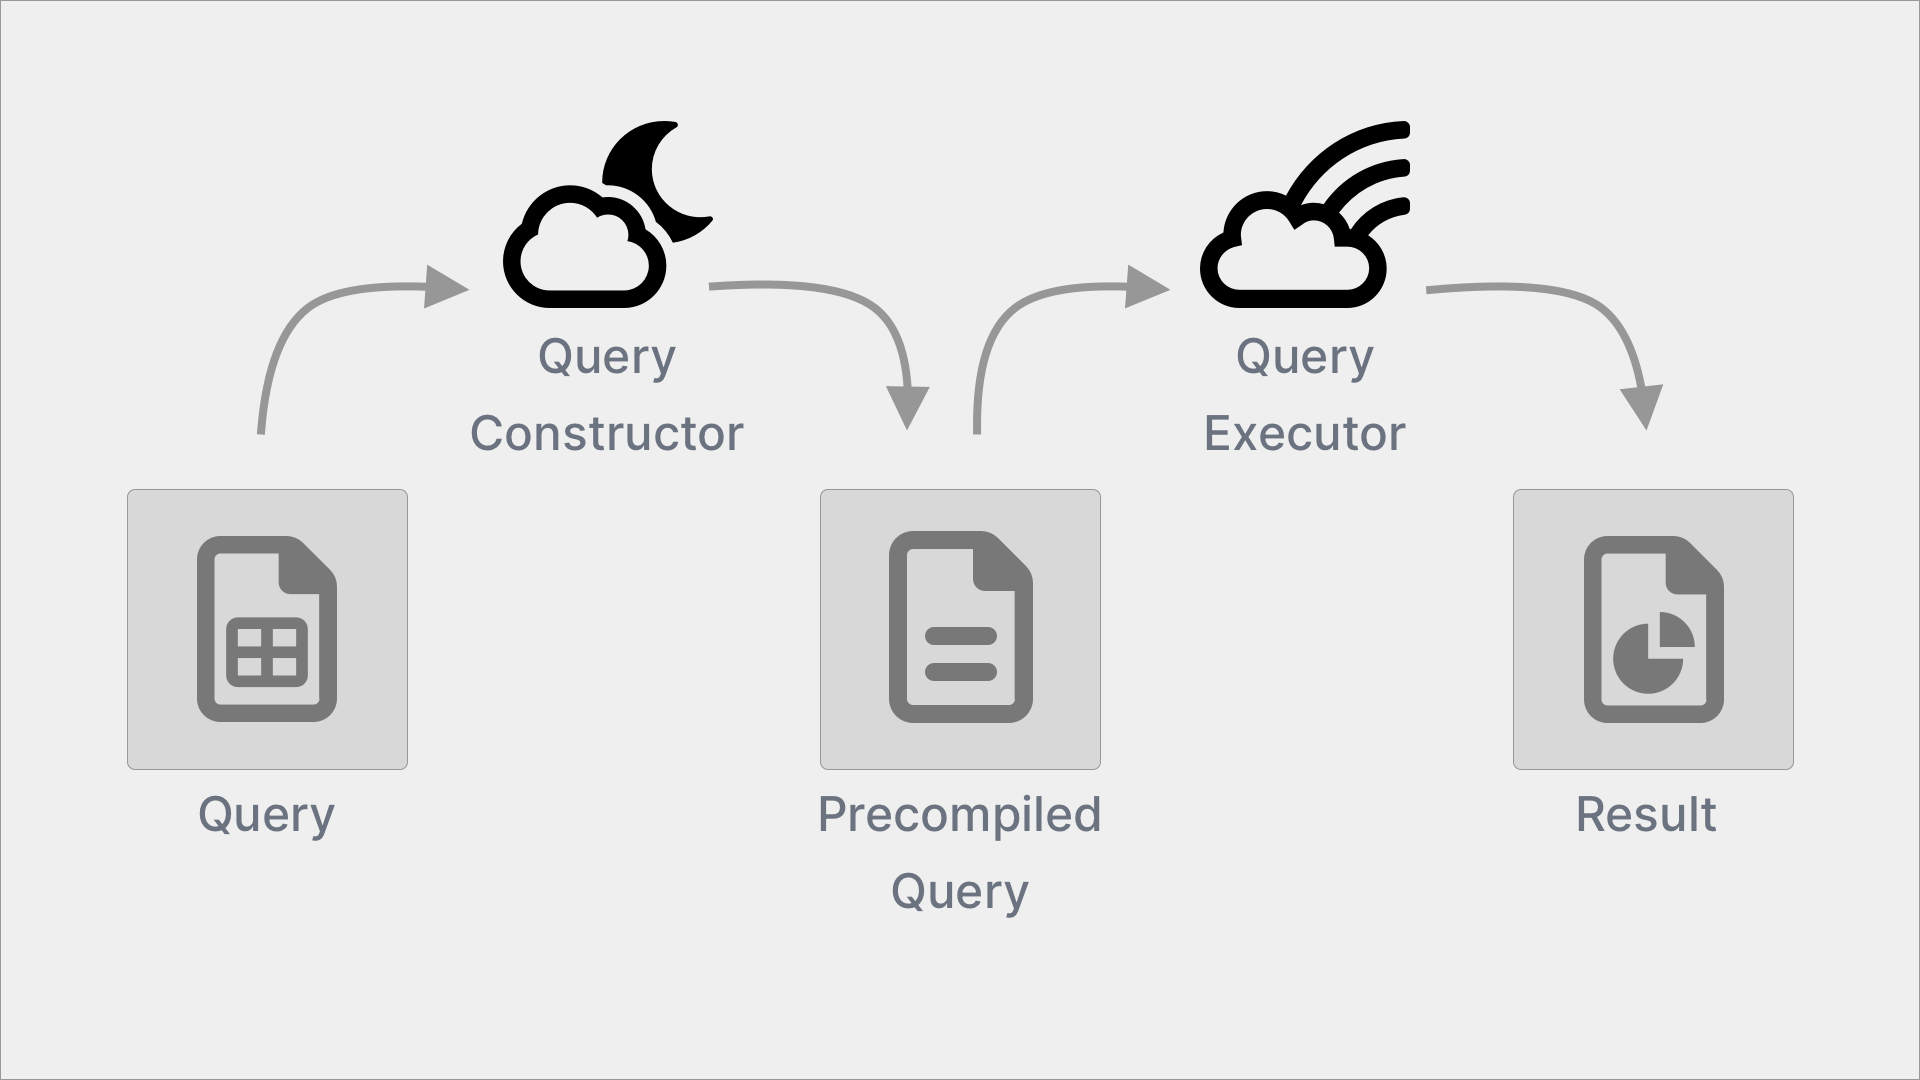 A graphic passing a query into the query constructor, resulting in a precompiled query. This gets passed into the query executor, which returns a result.